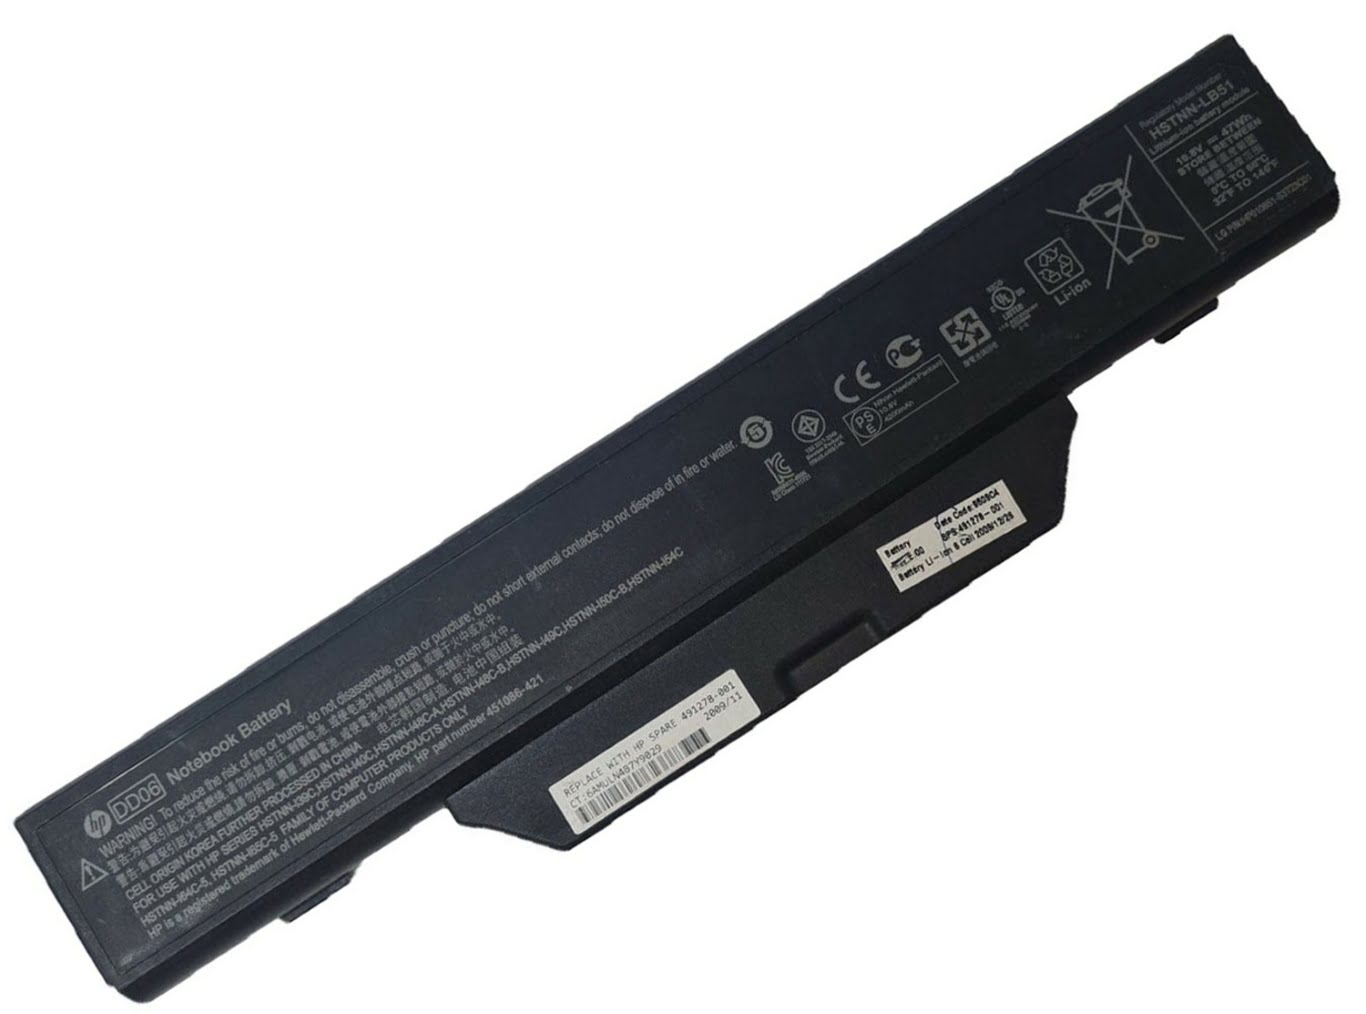 451085-141, 451086-121 replacement Laptop Battery for HP 550, 610, 10.8V, 6 cells, 47wh